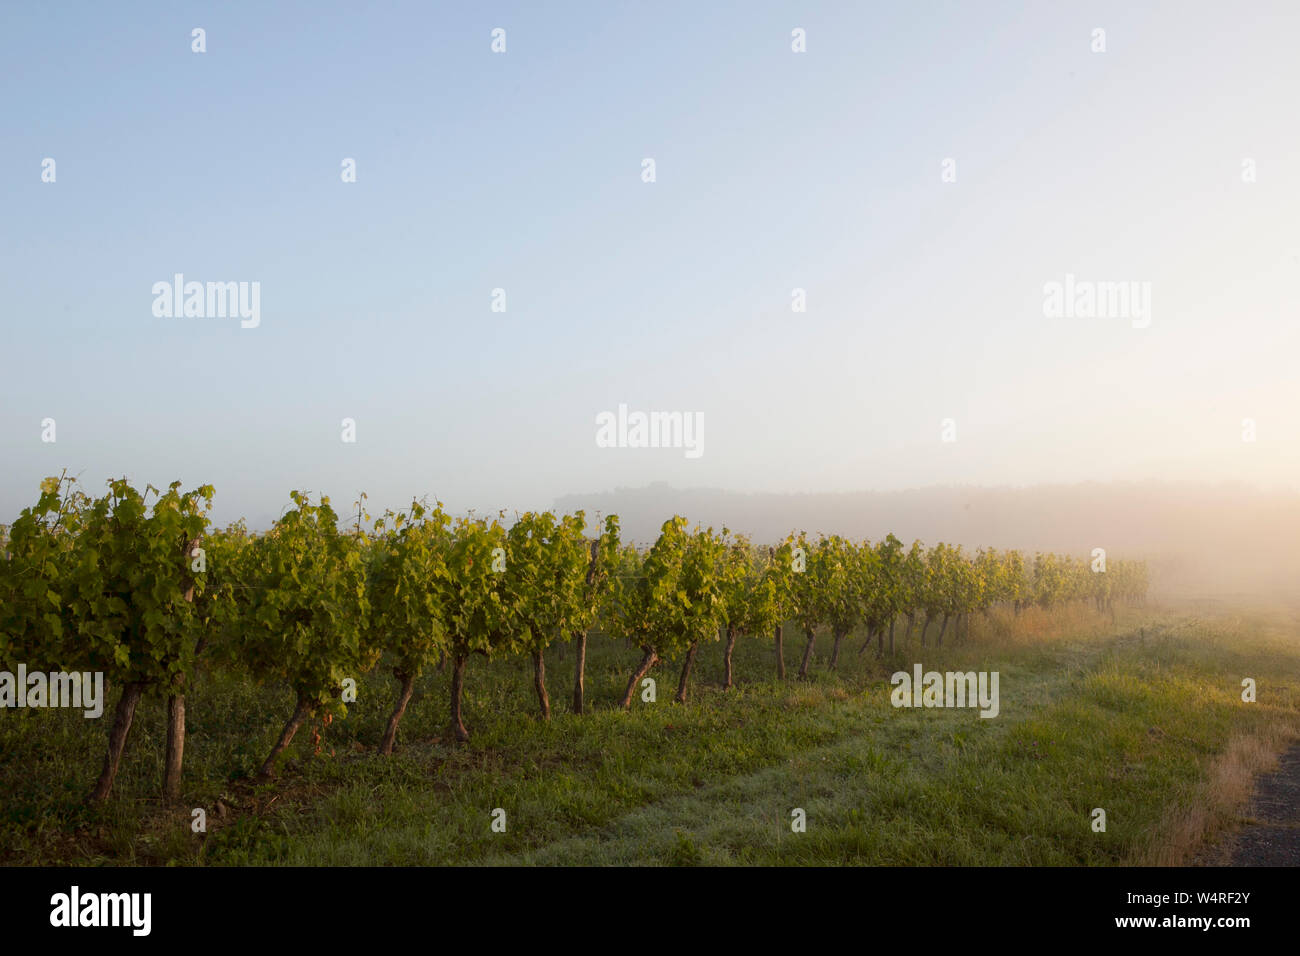 Vine yards in early morning sun in Duras, France Stock Photo